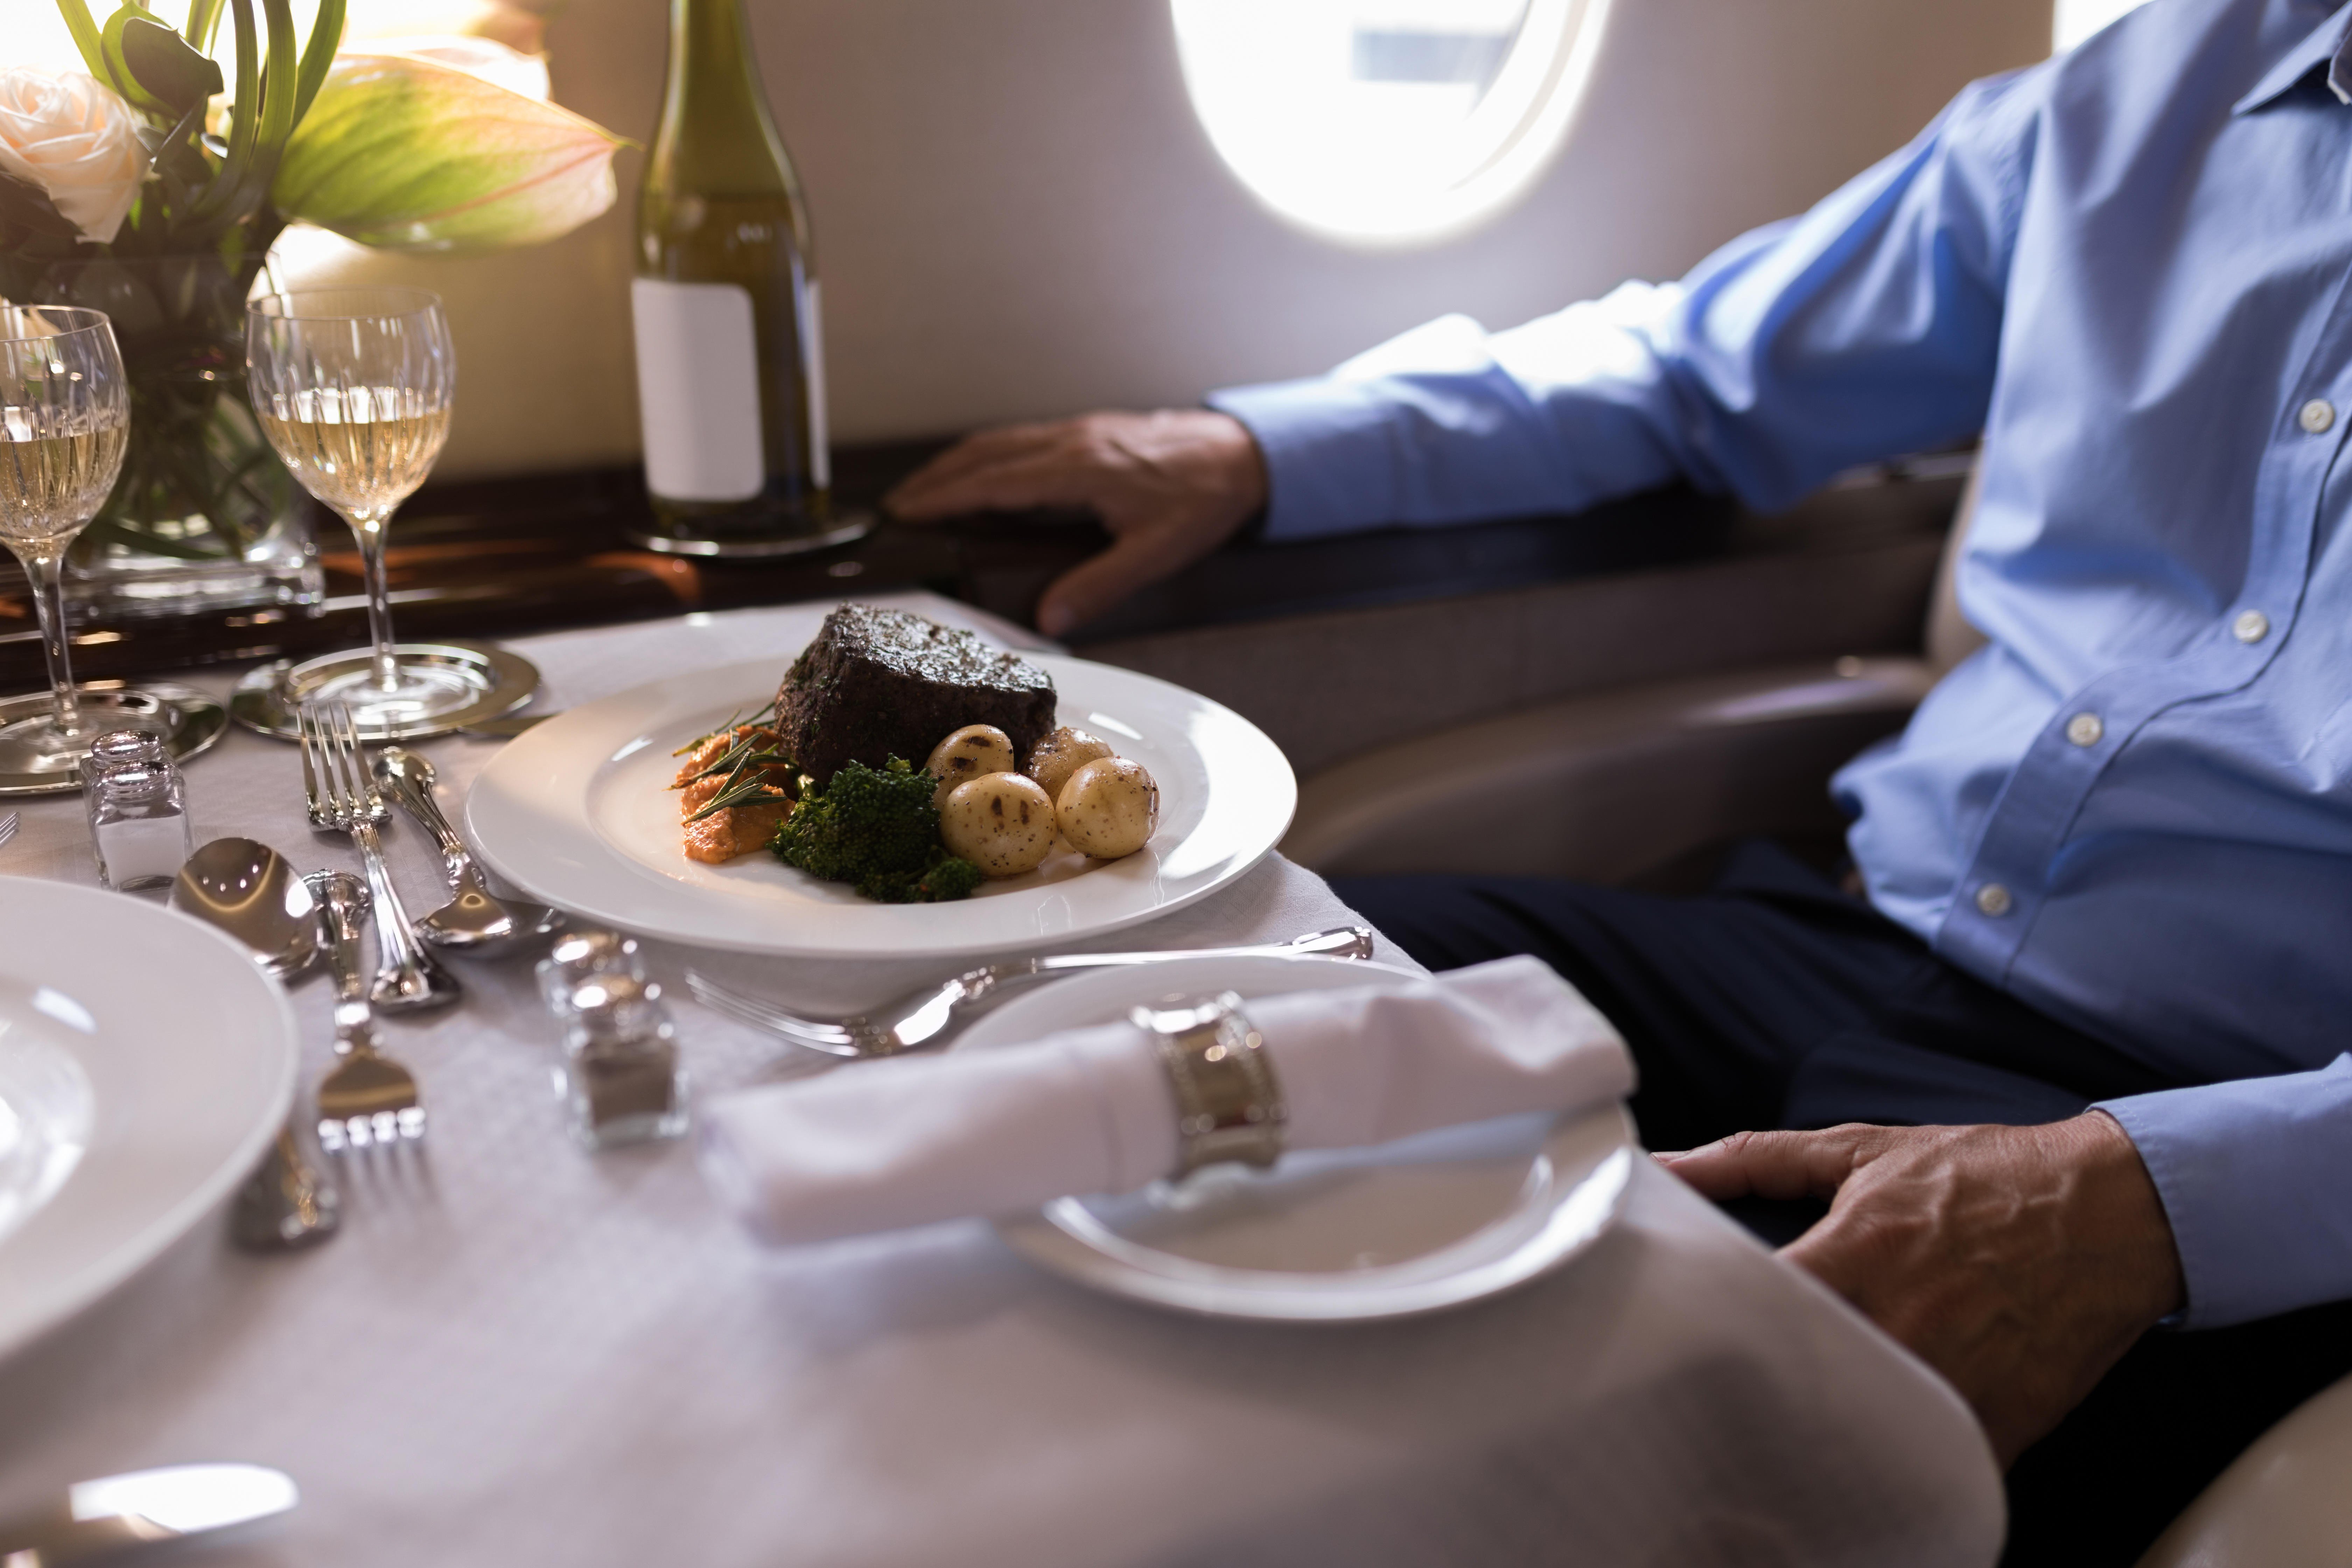 Private jet meals: what's on the menu when you fly VIP, and the dishes  celebrities demand | South China Morning Post